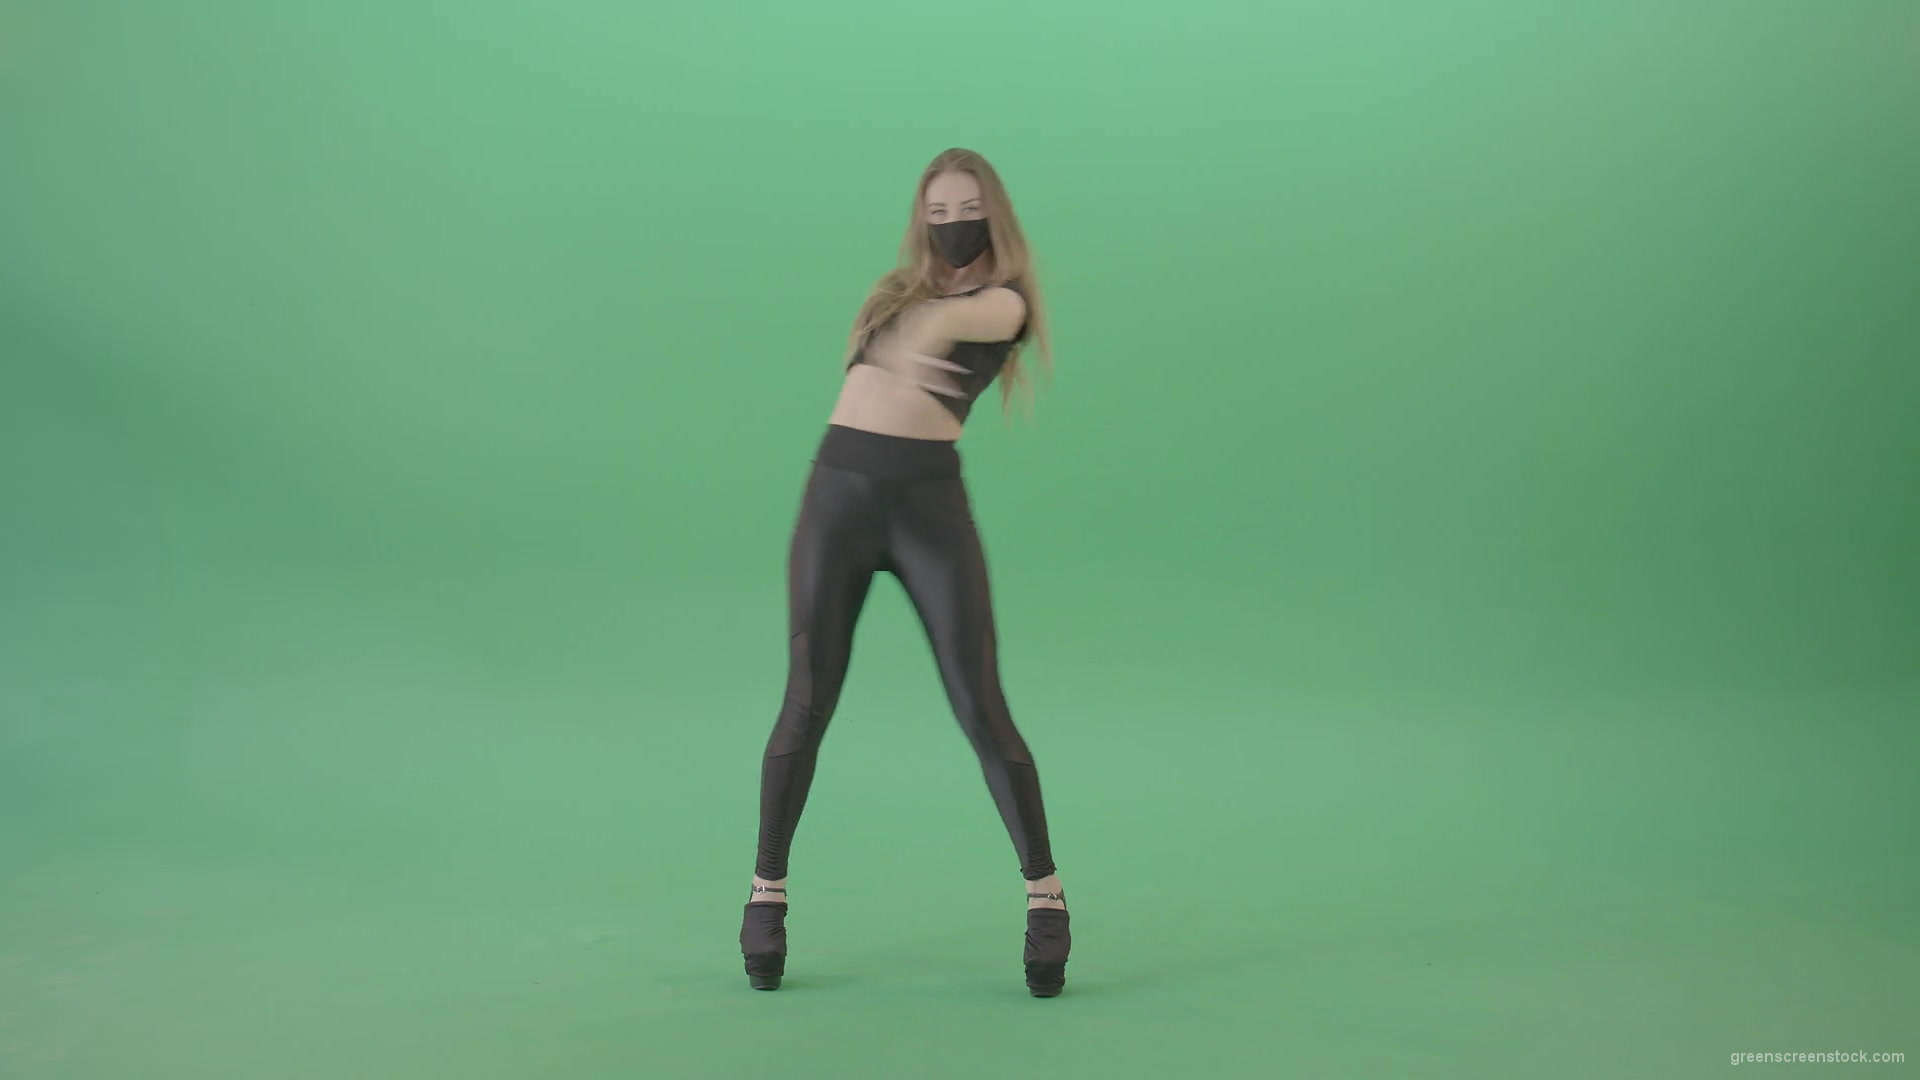 Sexy-girl-in-black-mask-and-costume-dancing-with-erotic-moves-isolated-on-green-screen-4K-video-footage-1920_009 Green Screen Stock